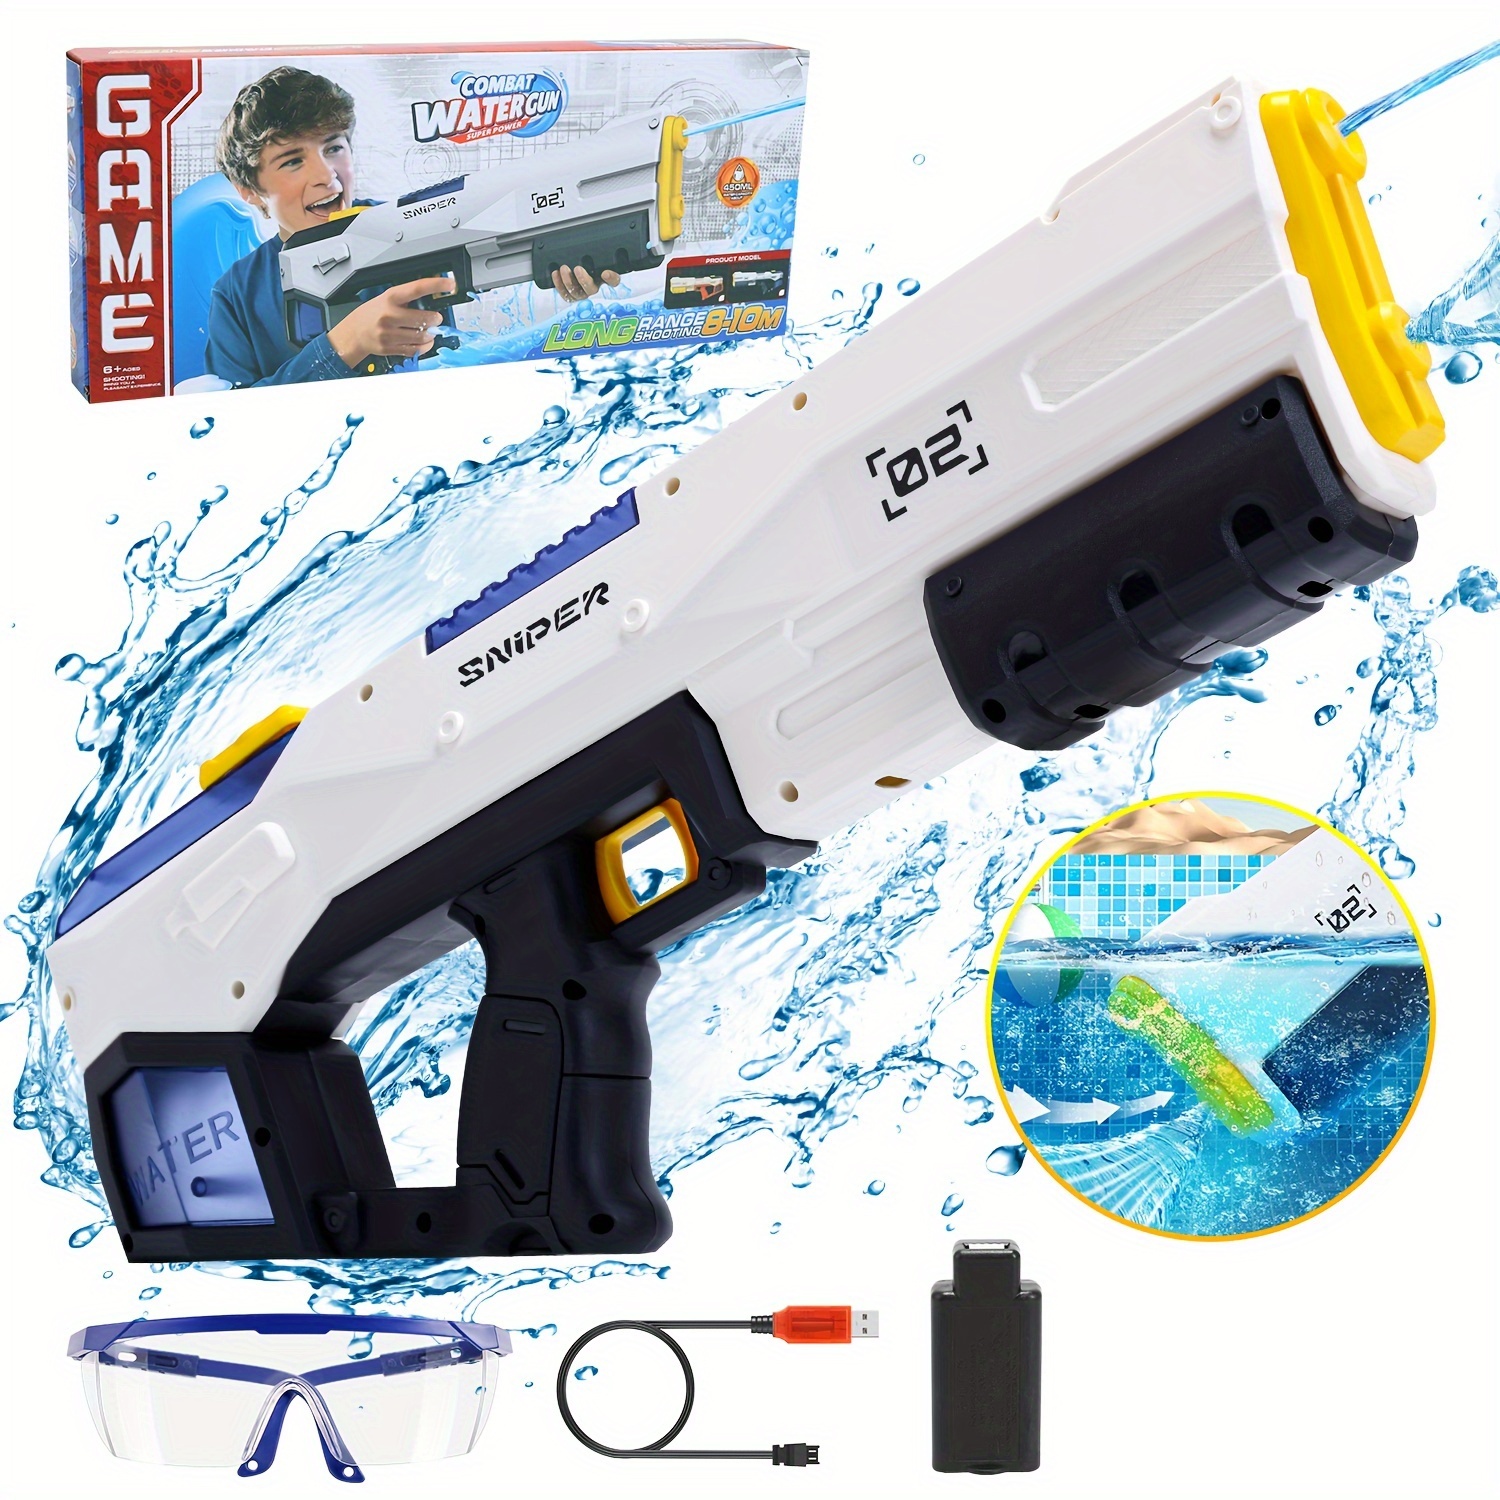 

Eaglestone Electric Water Gun For Kids Age 8-12, Automatic Squirt Gun For Adults 33ft Range, Modular Battery Water Soaker, Perfect Toy For Kids And Summer Party, Ideal For Pool, Beach Outdoor Games